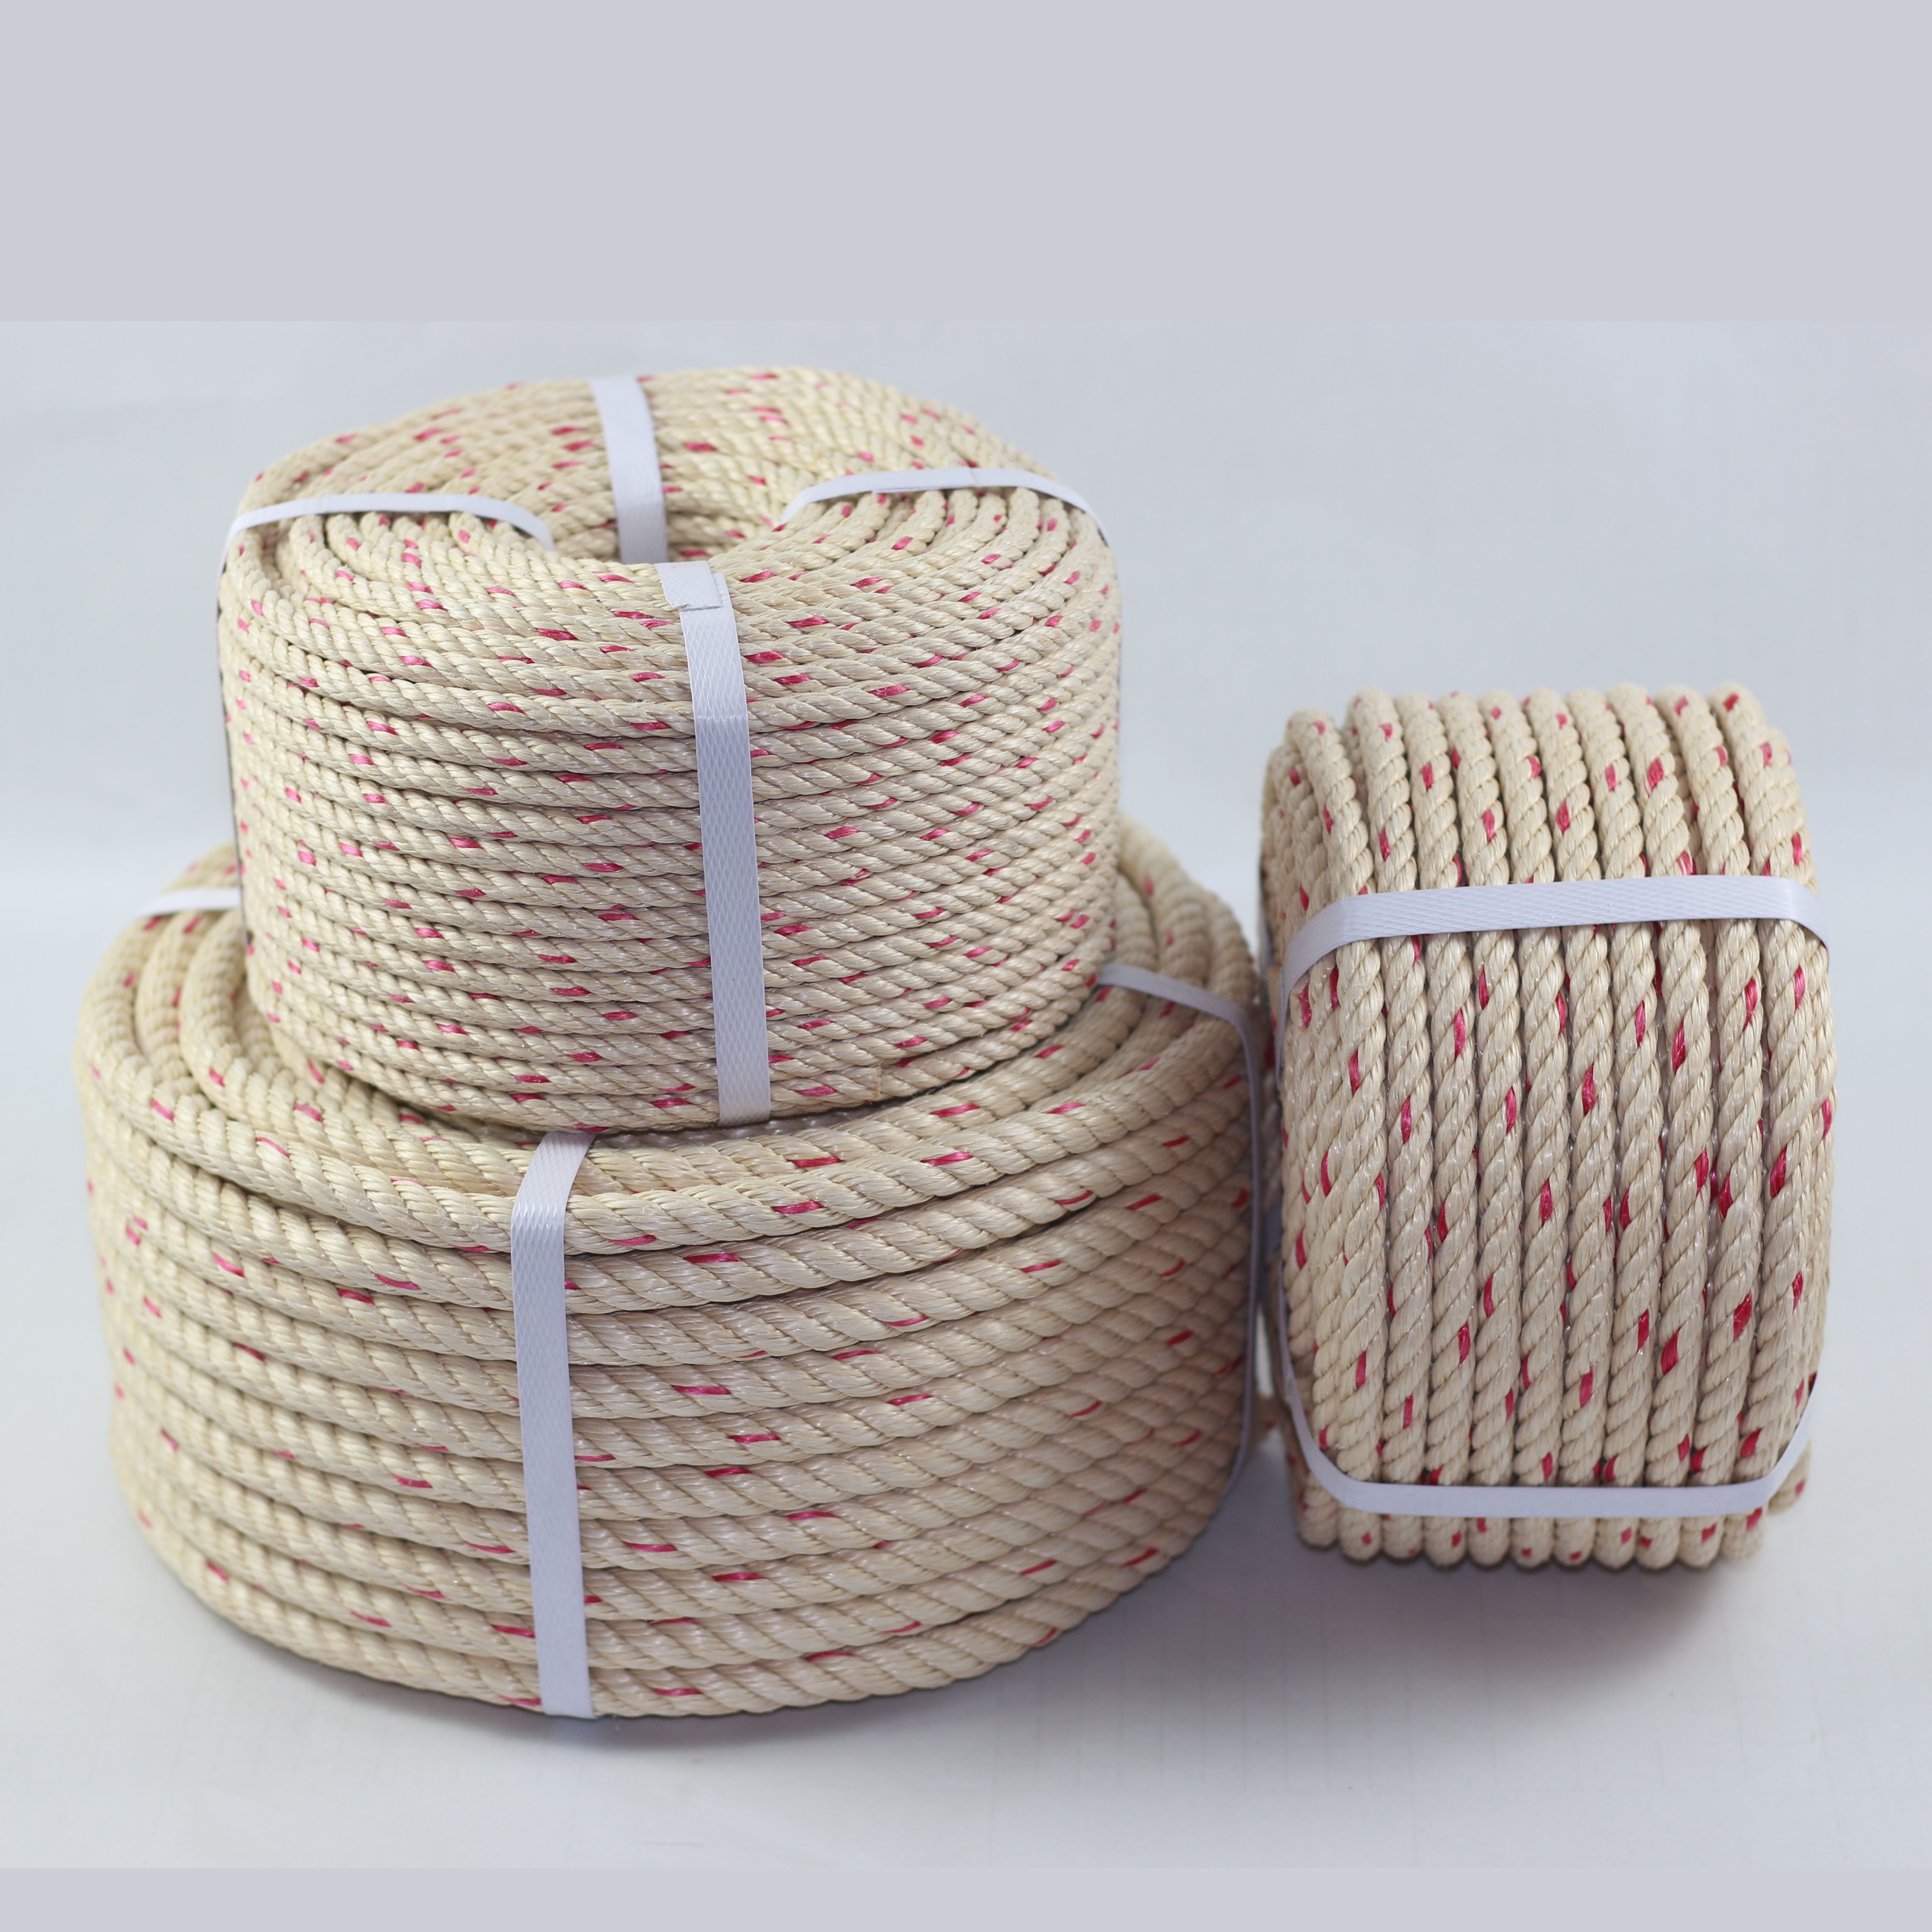 High-Quality Rope Imported From China - A Must-Have for All Your Projects